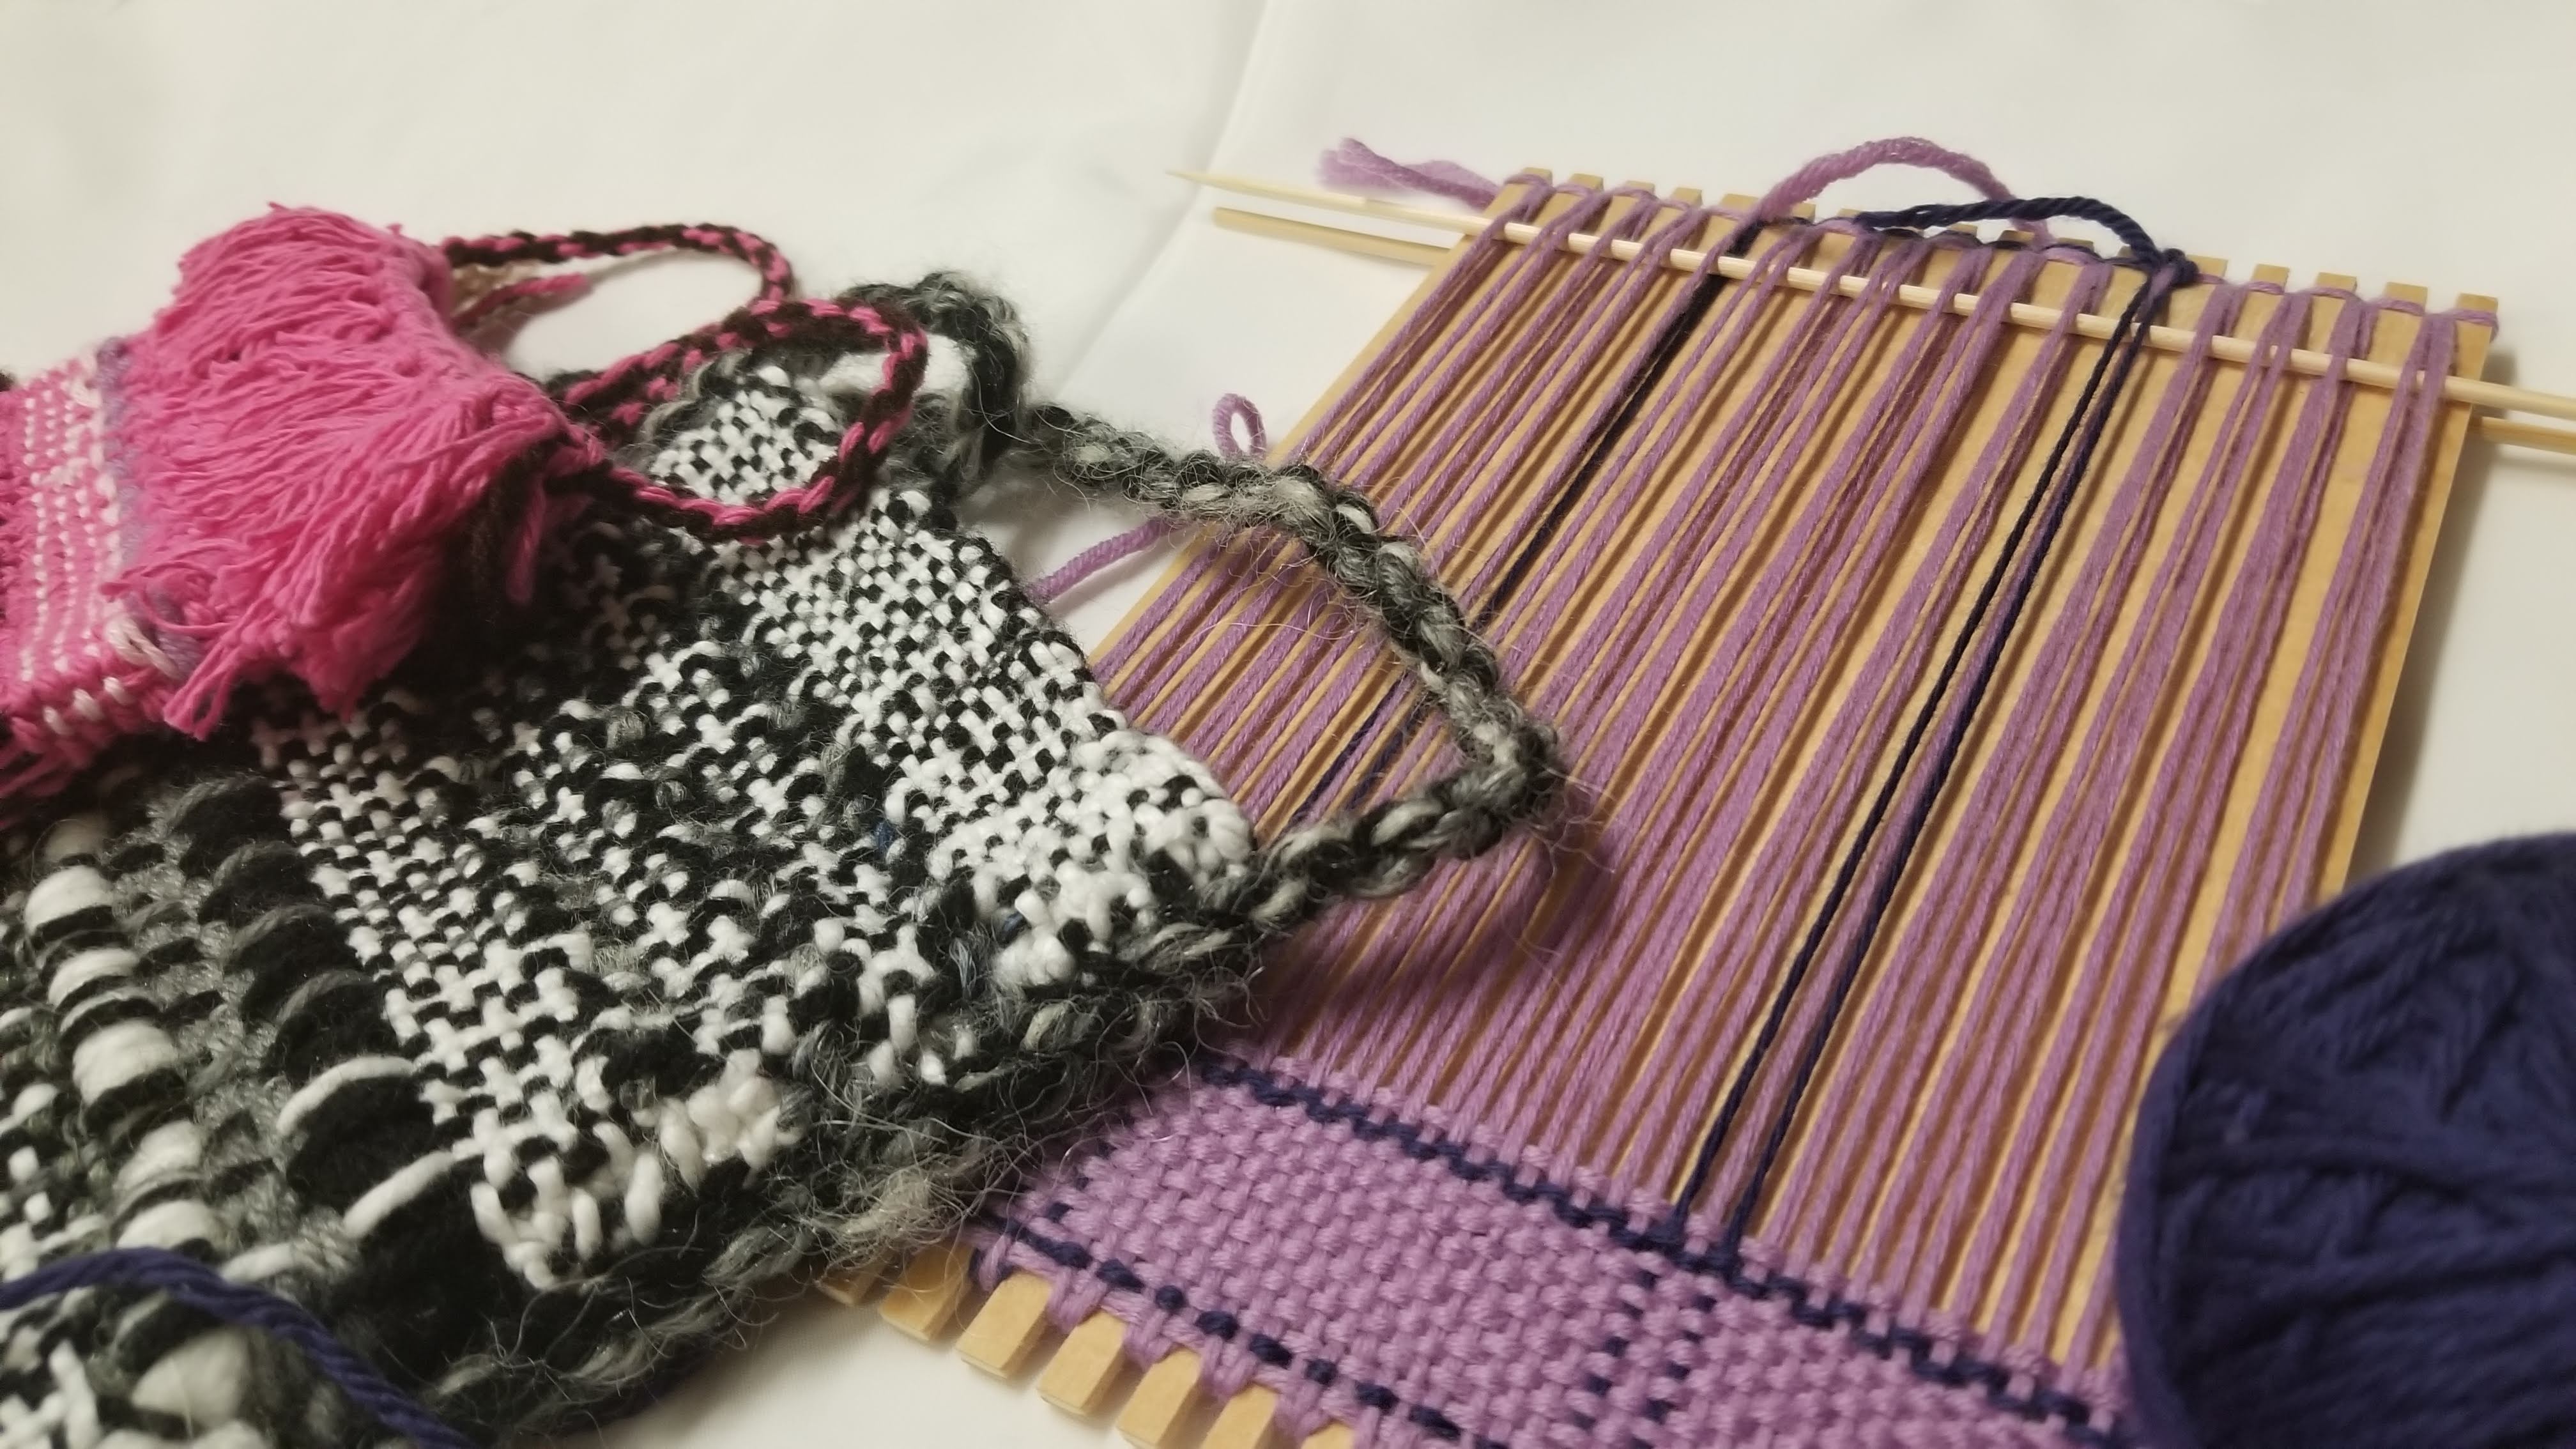 Two woven bags and a loom with yarn